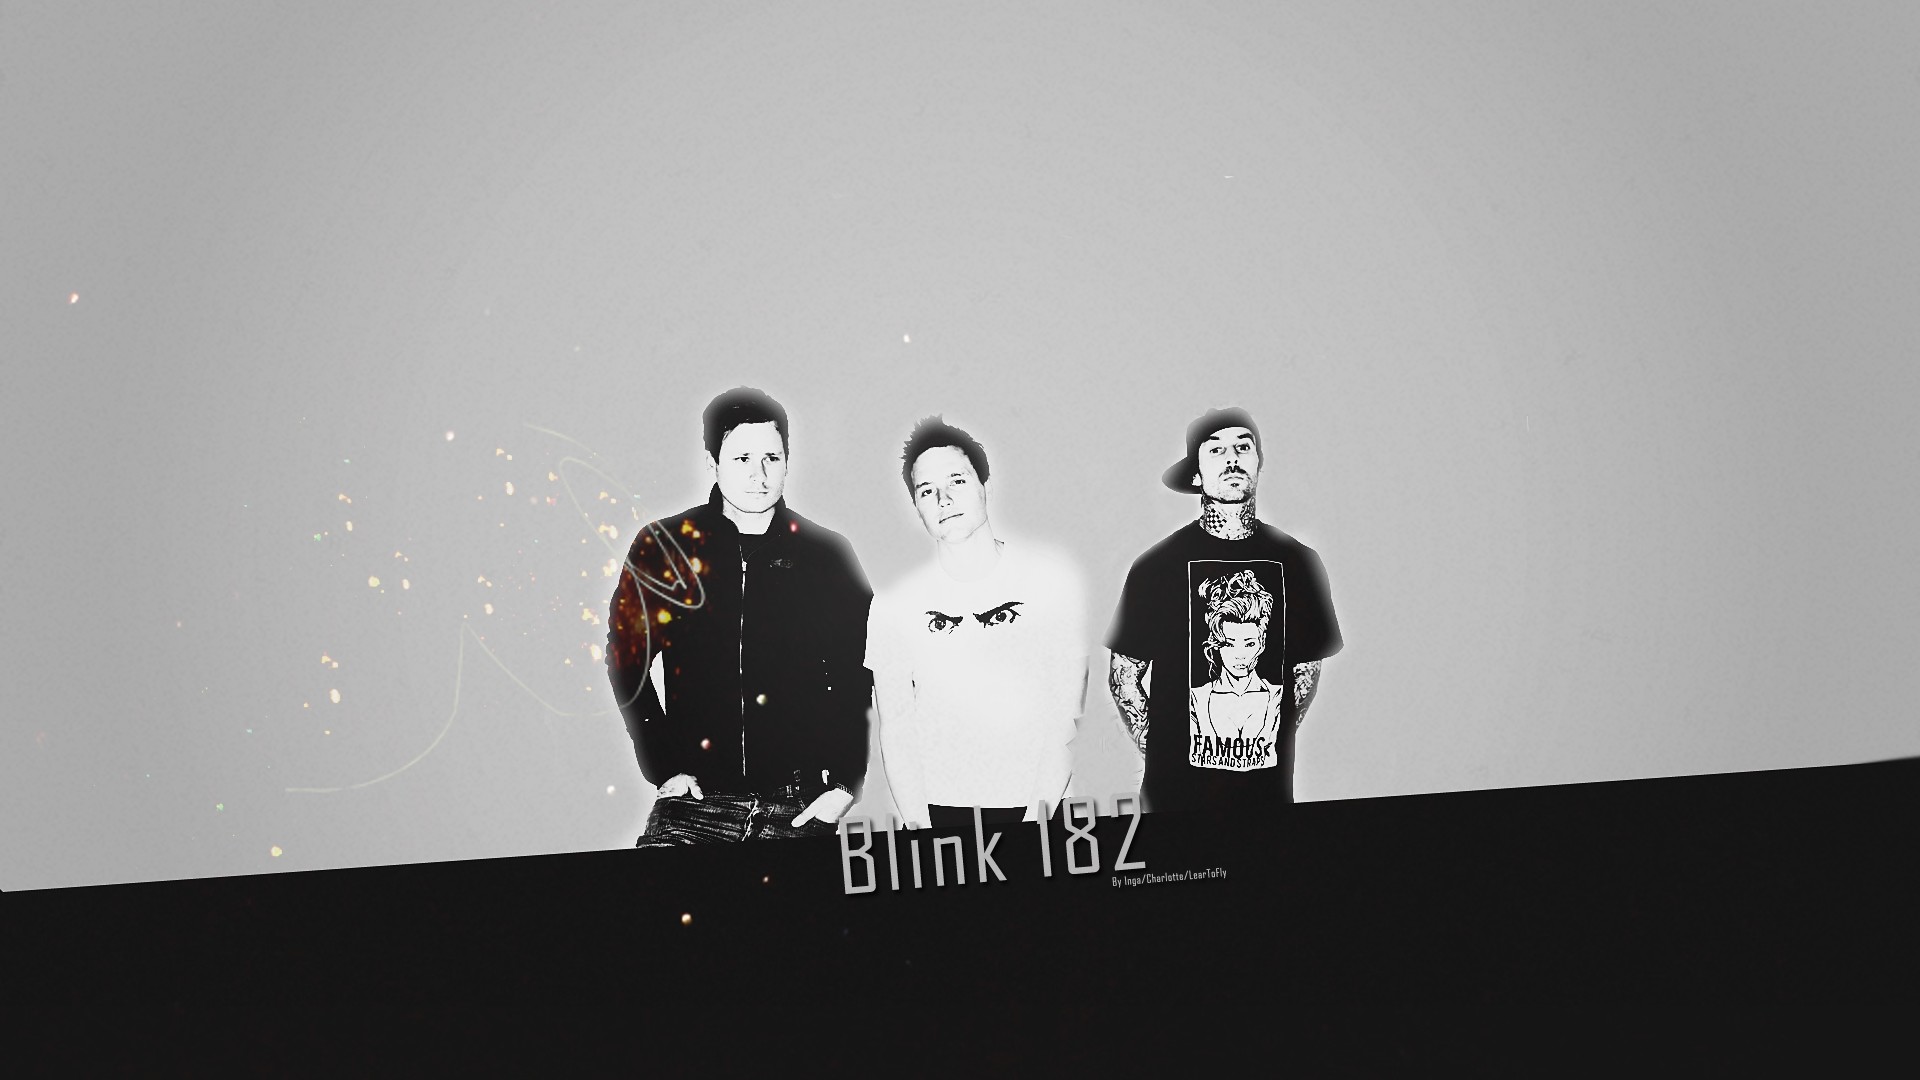 1920x1080 Download Wallpaper  blink-182, background, letters, spots,  silhouettes Full HD 1080p HD Background